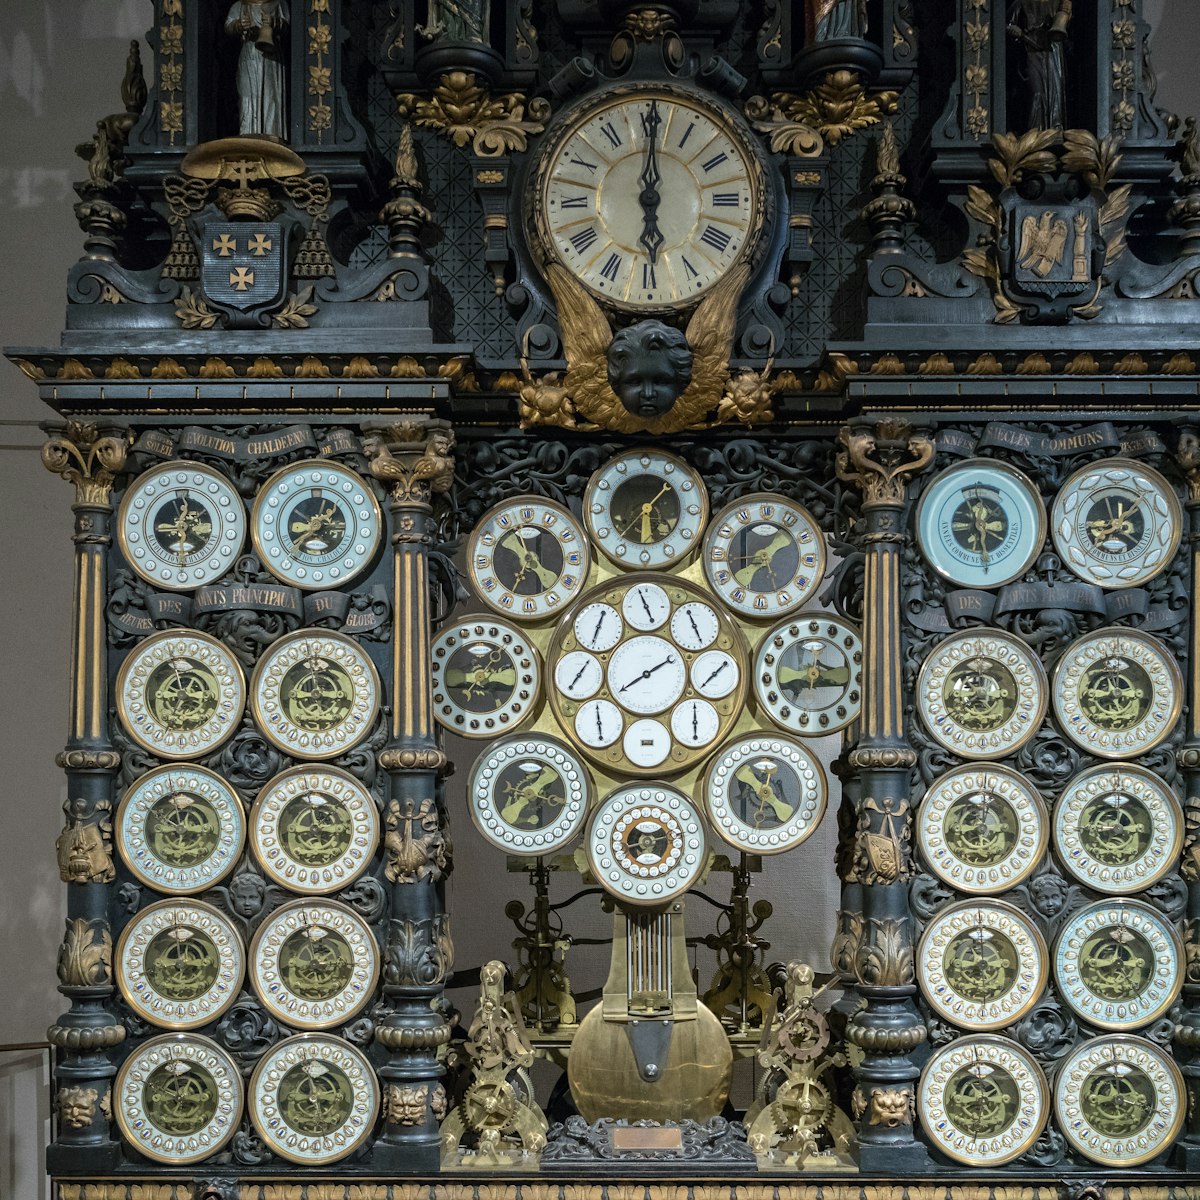 BESANCONS, FRANCE/EUROPE - SEPTEMBER 13: Astronomical Clock in Cathedral of St Jean in Besancon France on September 13, 2015; Shutterstock ID 323711300; full: digital; gl: 65050; netsuite: pot; your: Barbara Di Castro
323711300